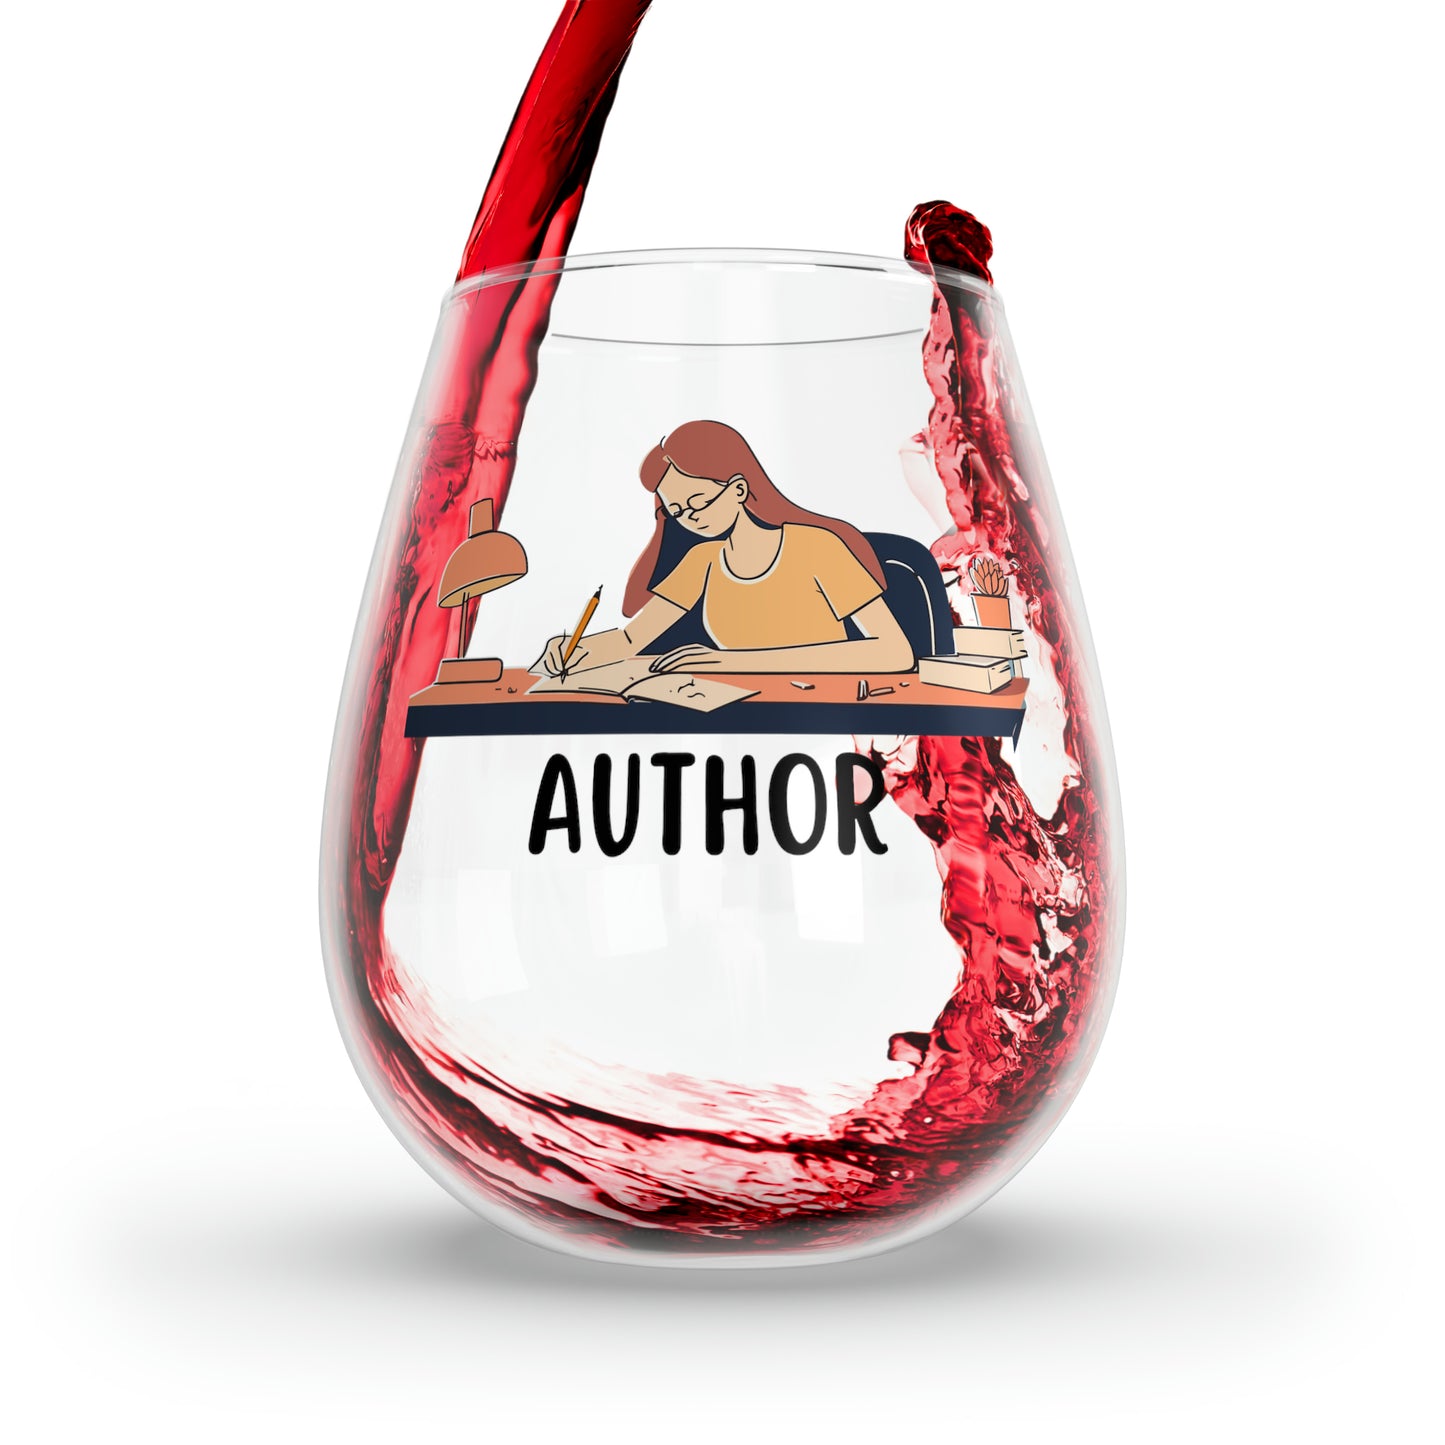 Author Wine Glass, Author Gifts, Author Stemless Wine Glass, Writer Wine Glass, Gift For Author, Gift For Book Writer, Author Christmas Gift